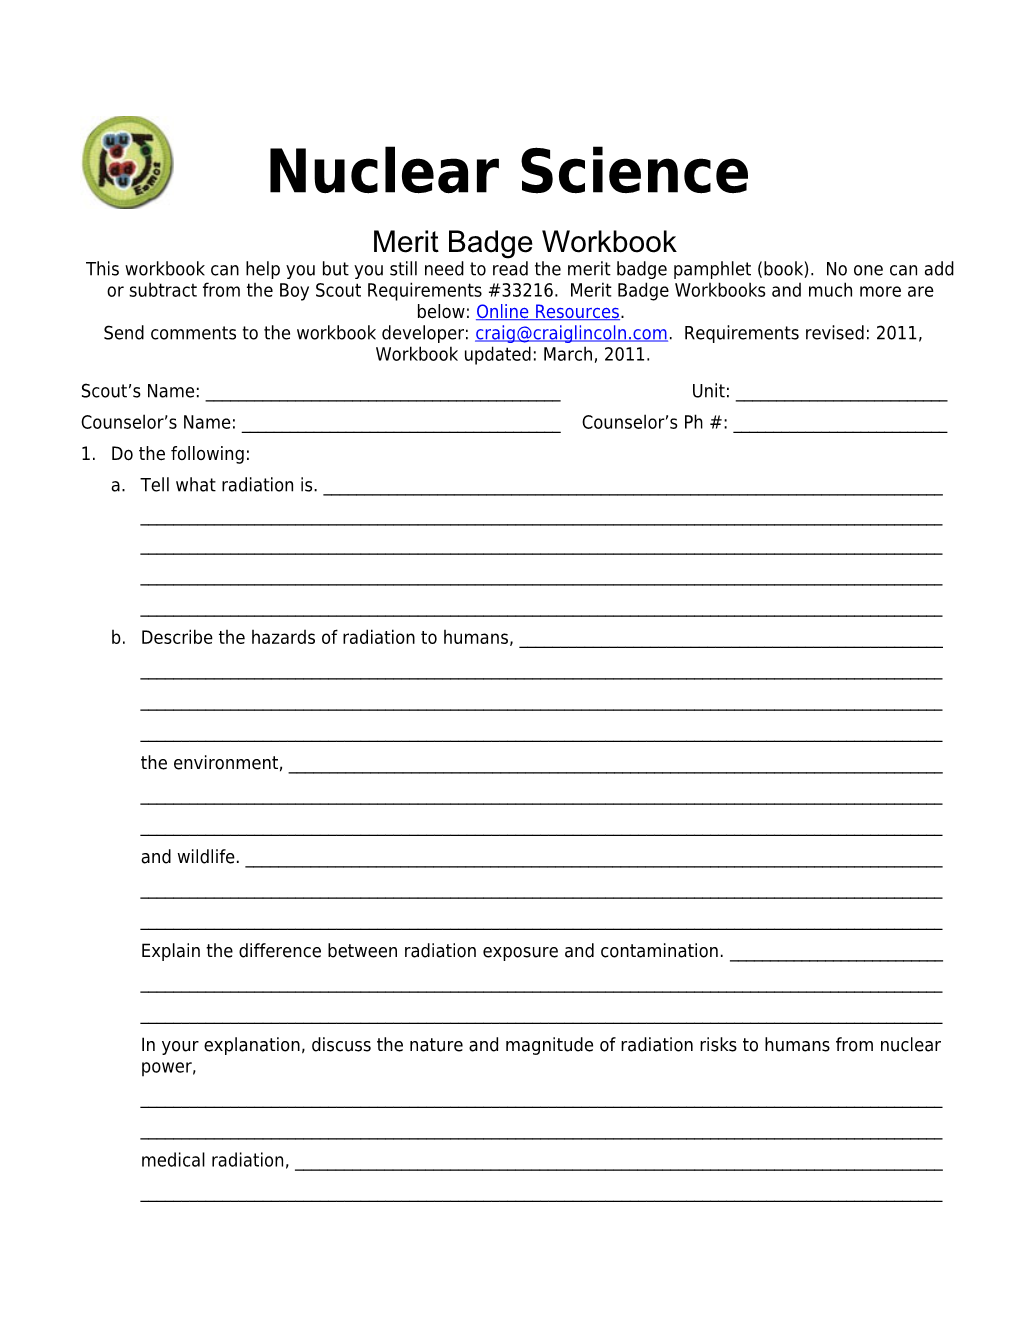 Nuclear Science P. 2 Merit Badge Workbook Scout's Name: ______